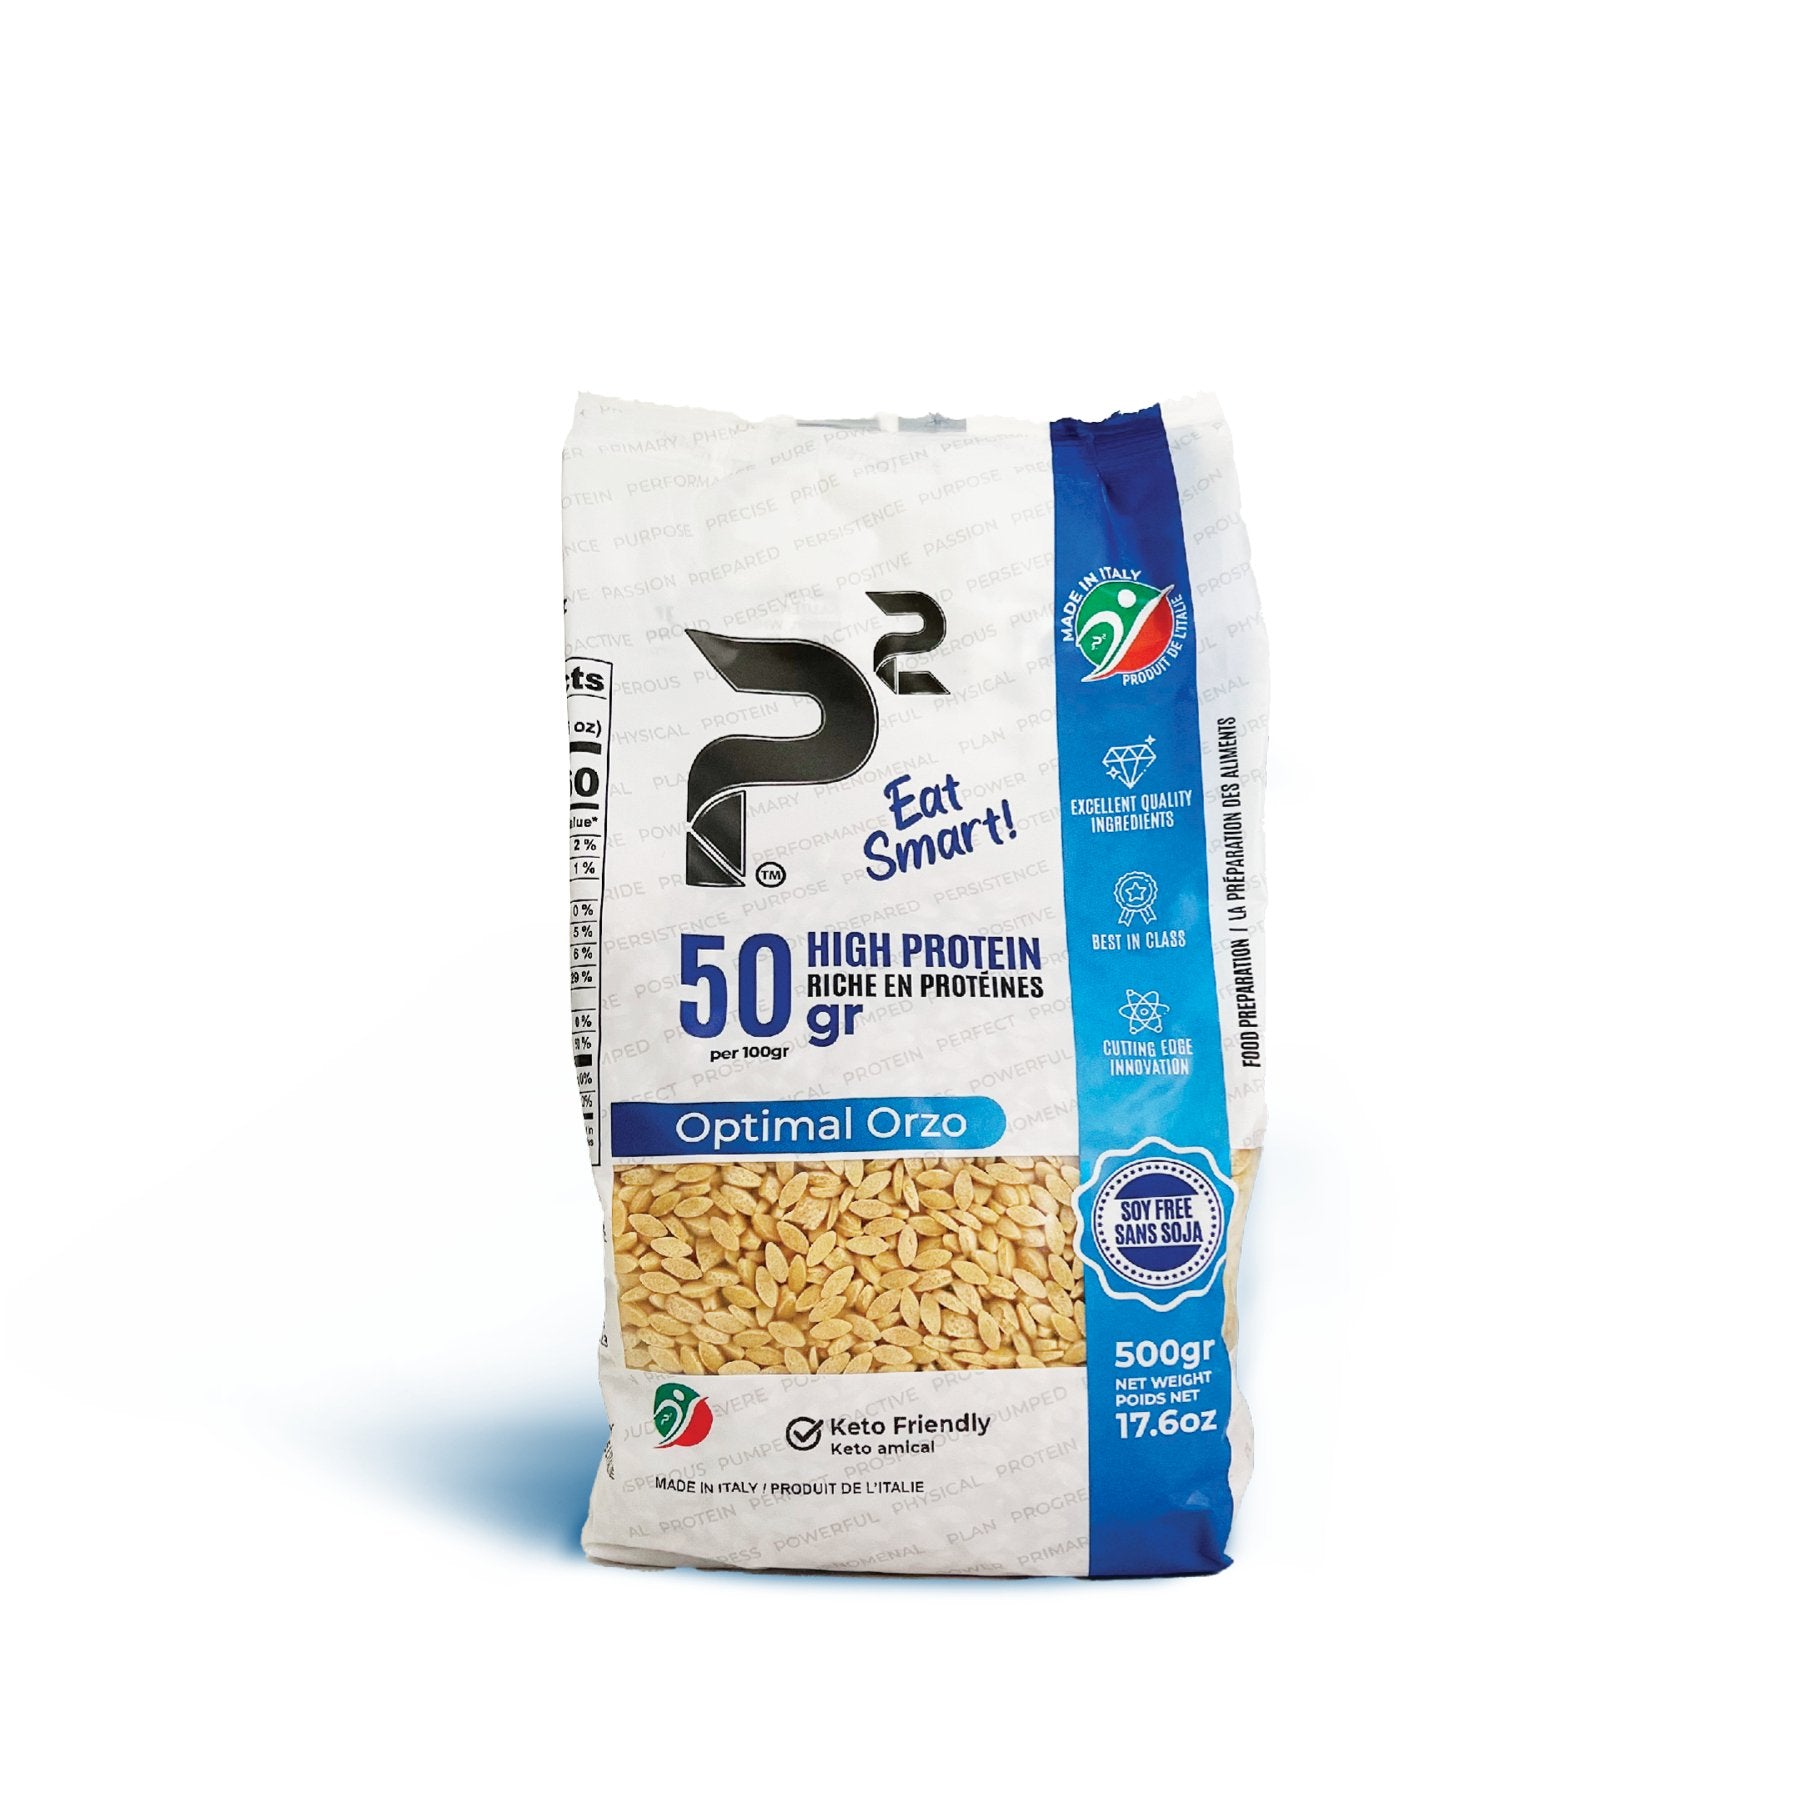 Optimal Orzo 500g High protein, fibre rich, and low carb pasta. 50g protein and 14g net carbs per 100g.